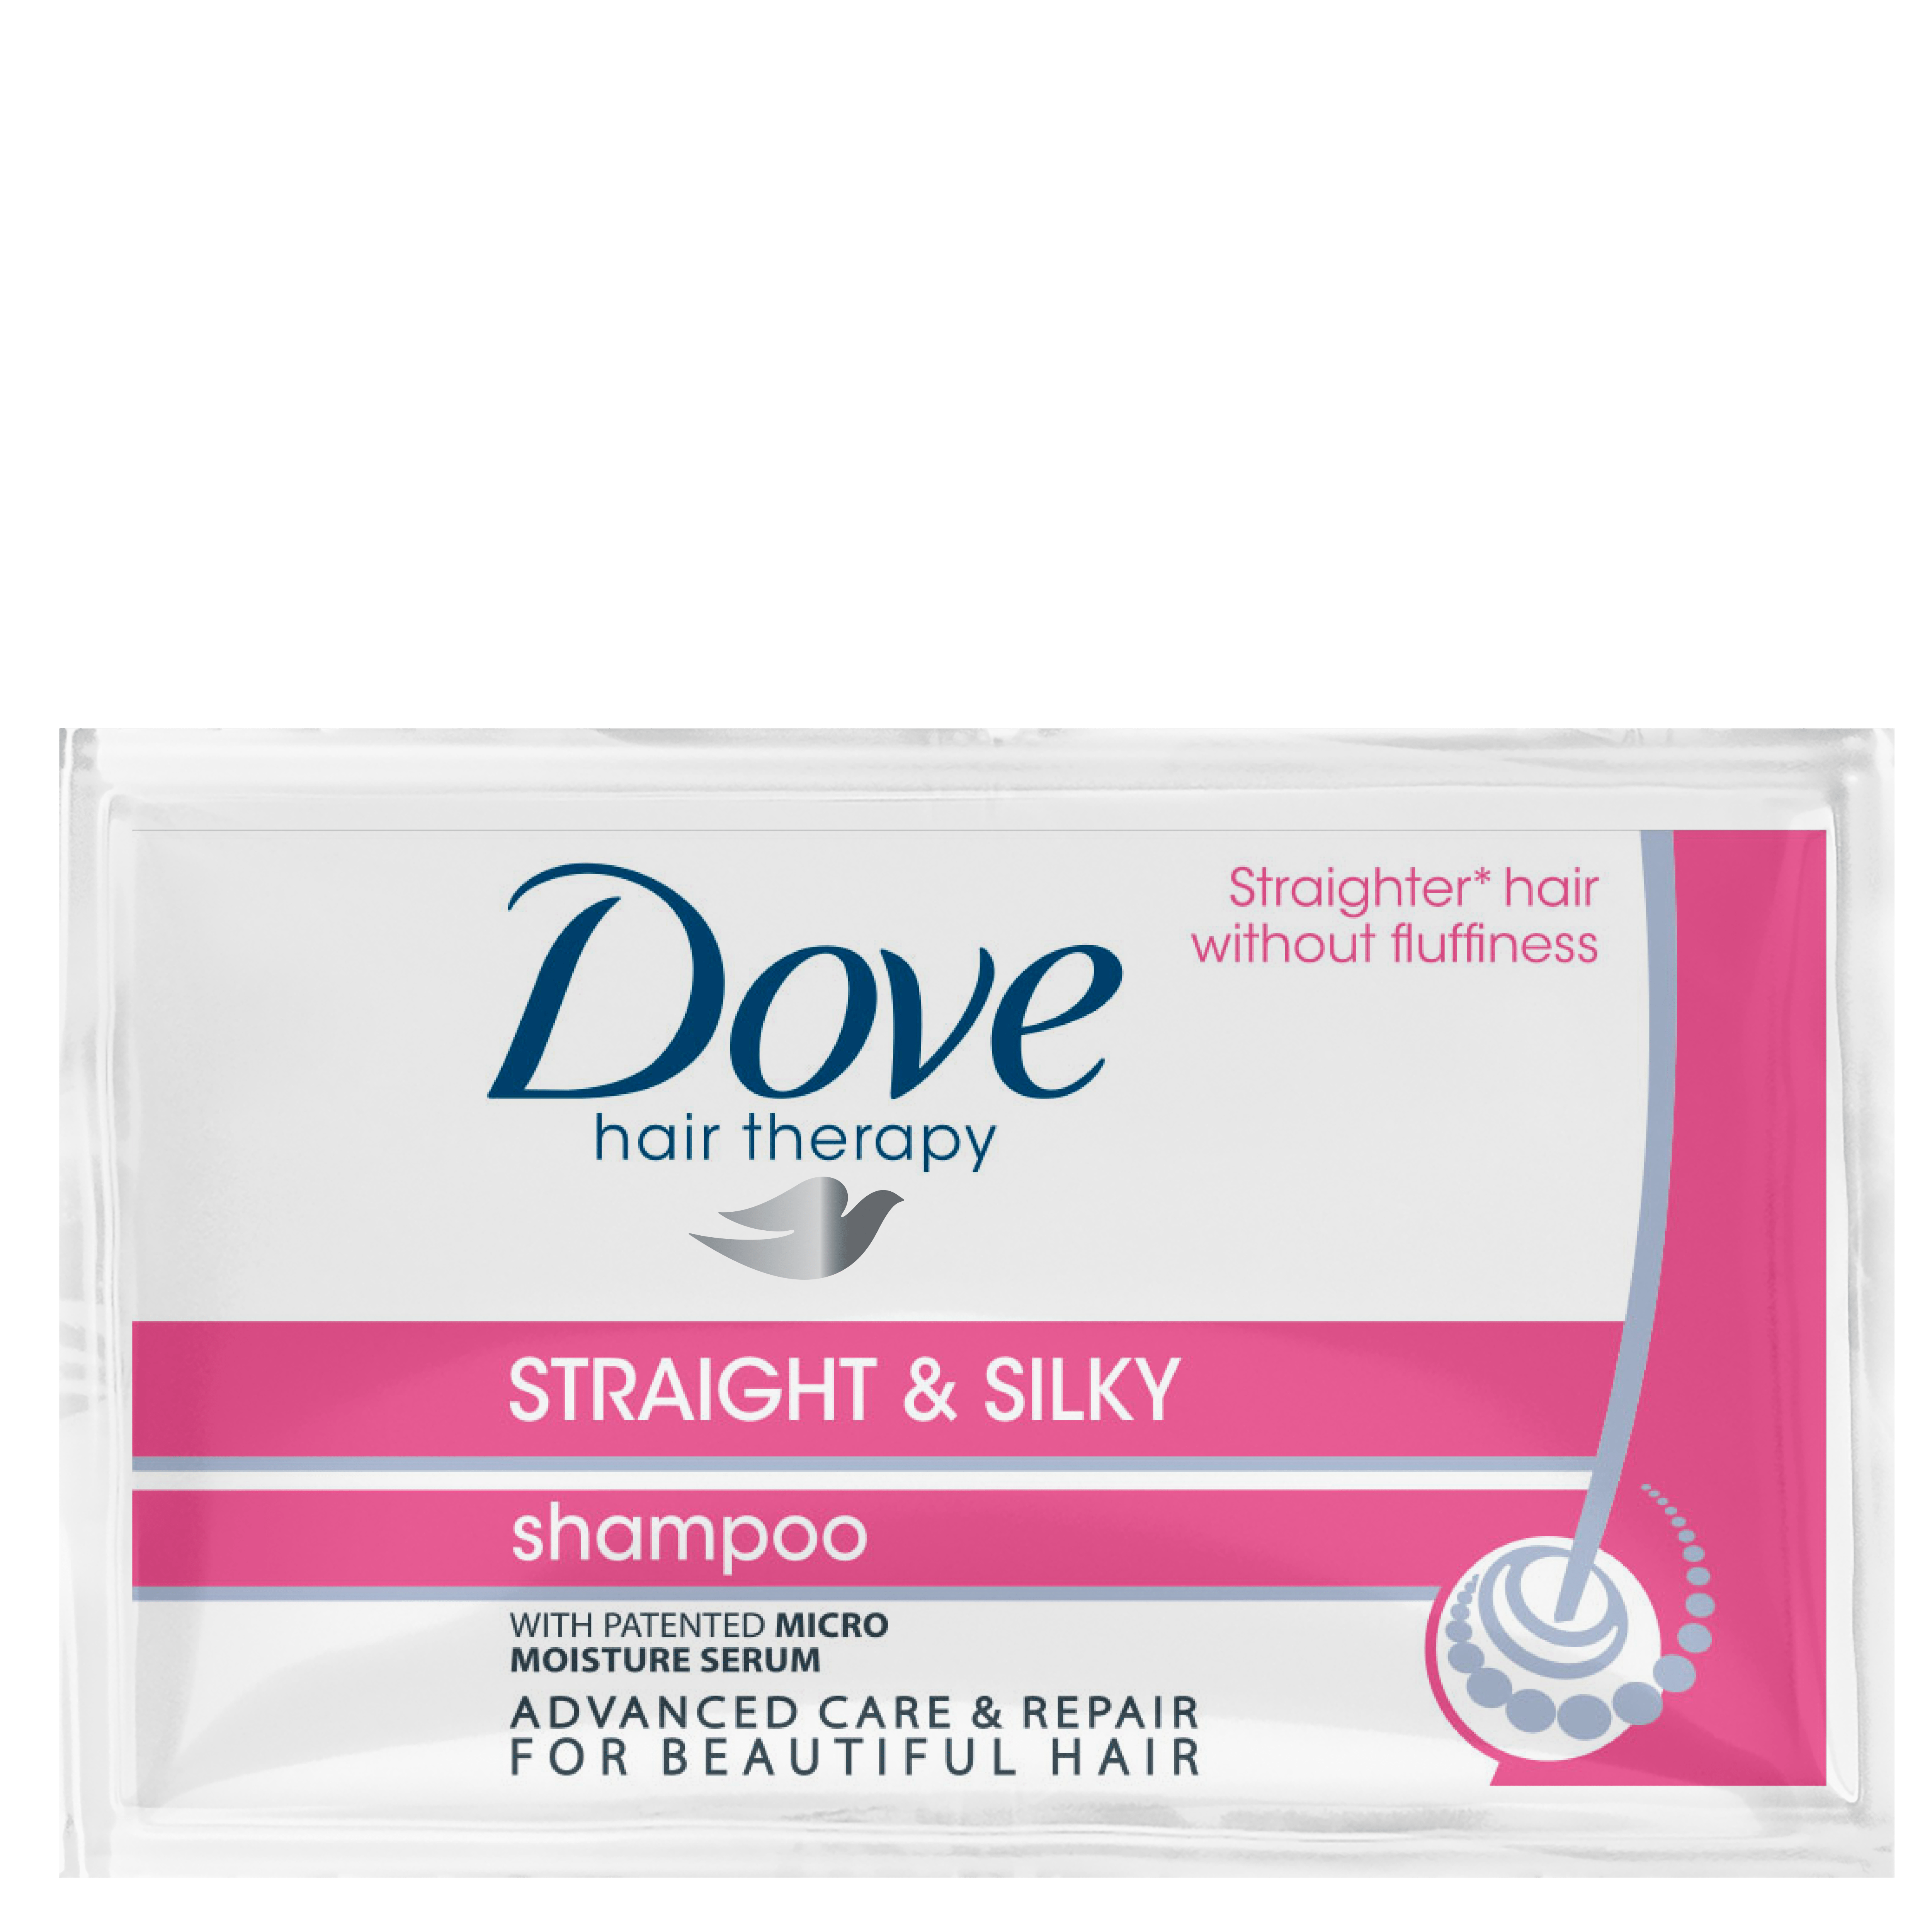 Dove Shampoo Logo - Find the perfect shampoo for your hair – Dove